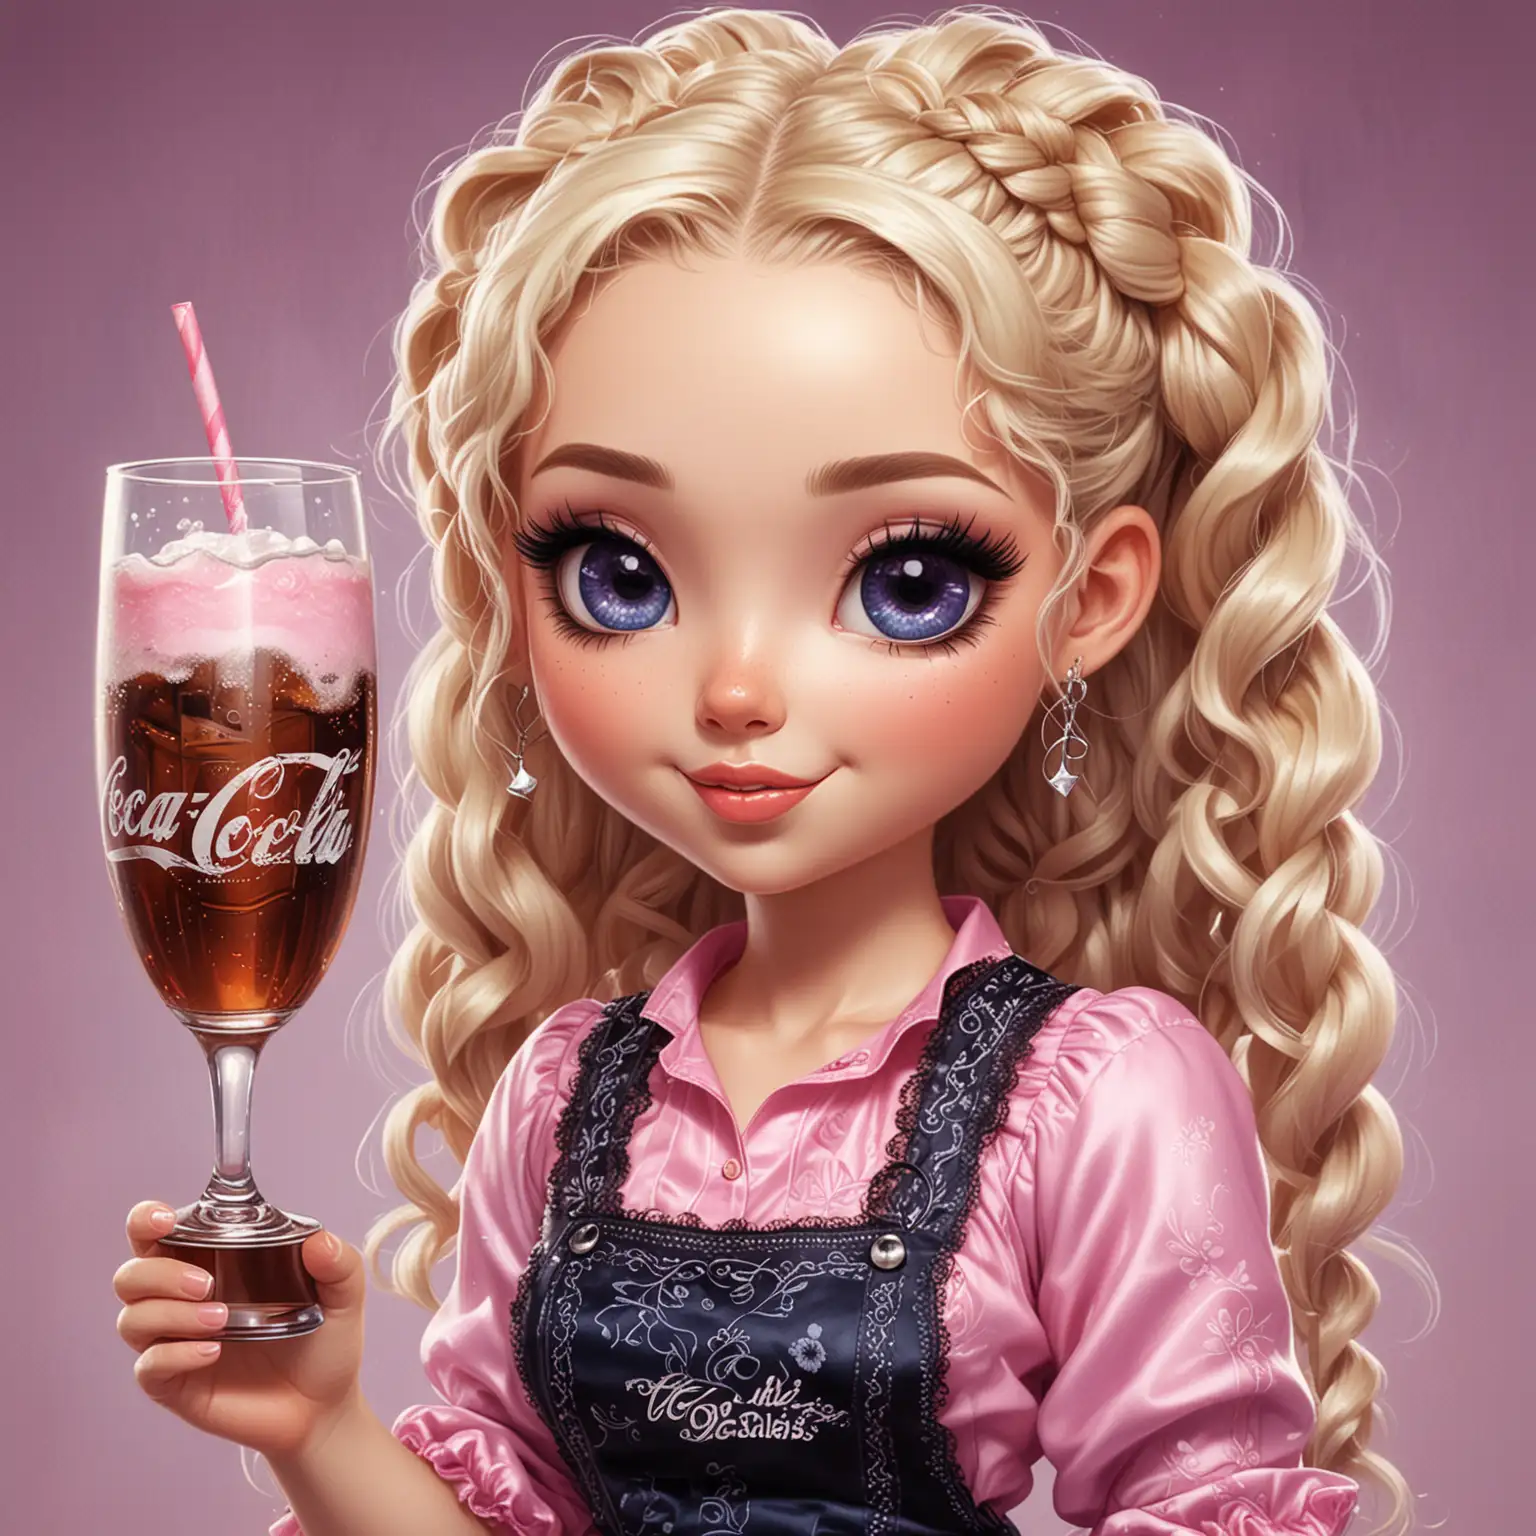 a glossy oil painting chibi manga style white caucasian woman, standing enjoying a glass of coke, with textured cascading long blonde curly goddess braids, flawless neutral makeup with heavy eyeliner and thick long black lashes, wearing pink blue purple silk lace jumpsuit, with the words 'Smile' { spelled correctly} in a bubble above her head